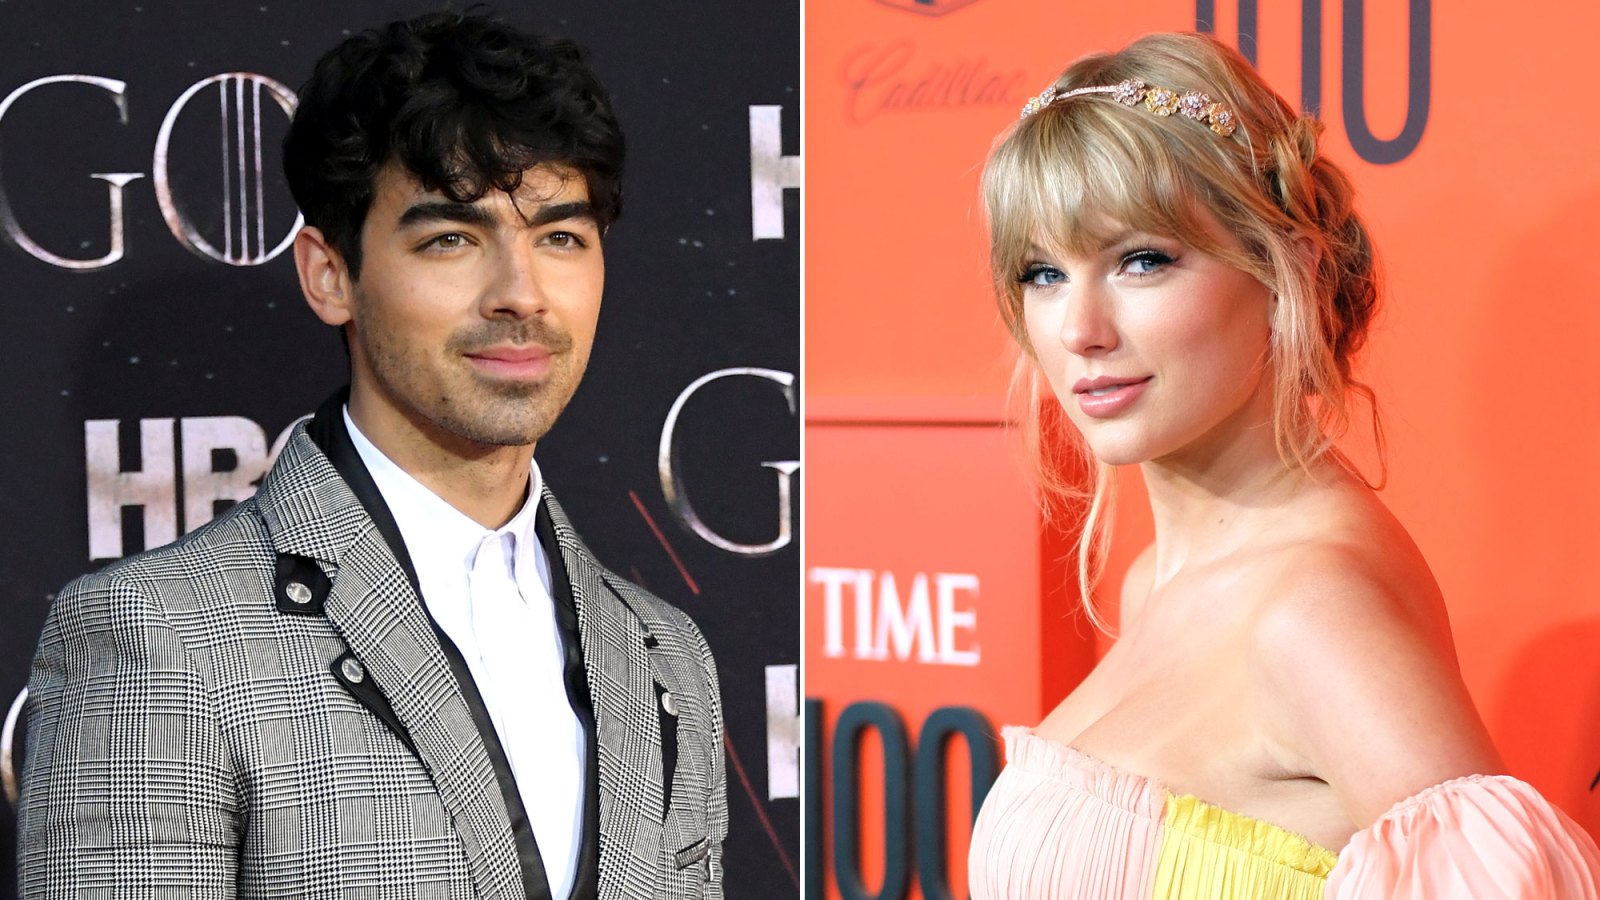 Joe Jonas Brushes Off Taylor Swift Calling Him Out on TV in 2008: ‘We’re All Friends’ Now